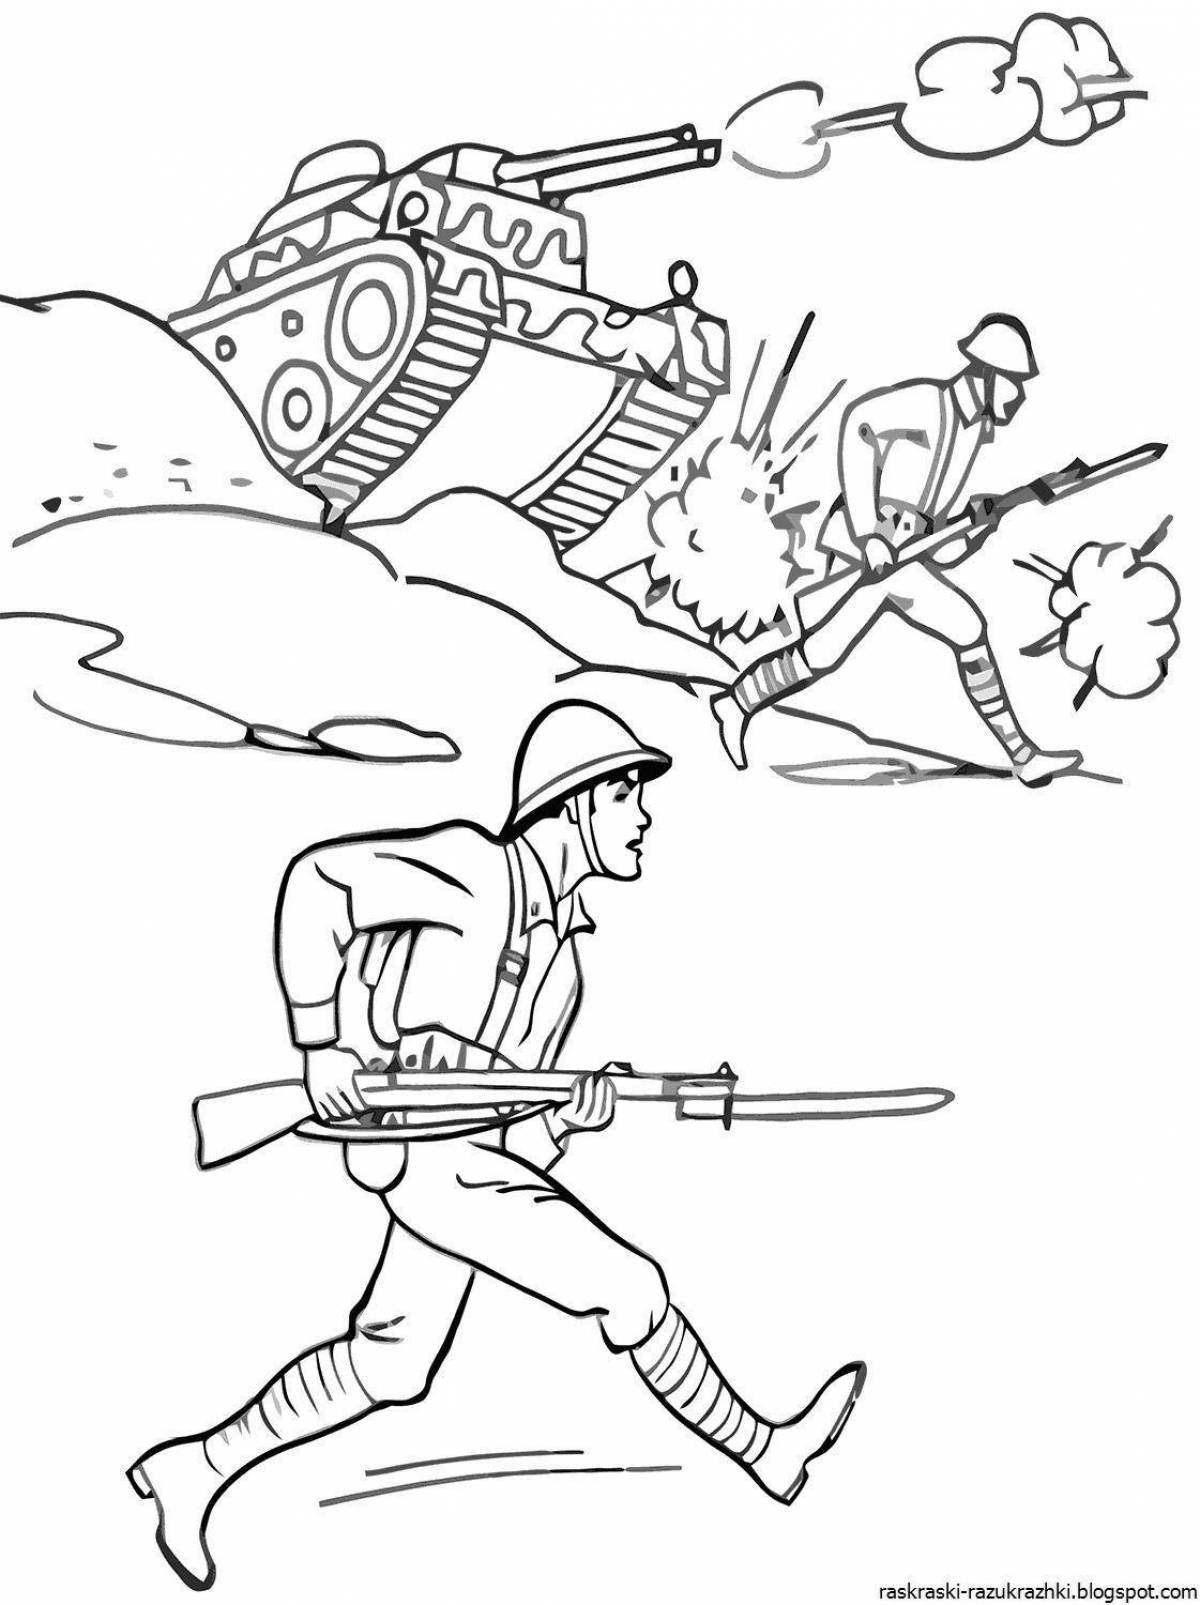 Fun military coloring book for 6-7 year olds